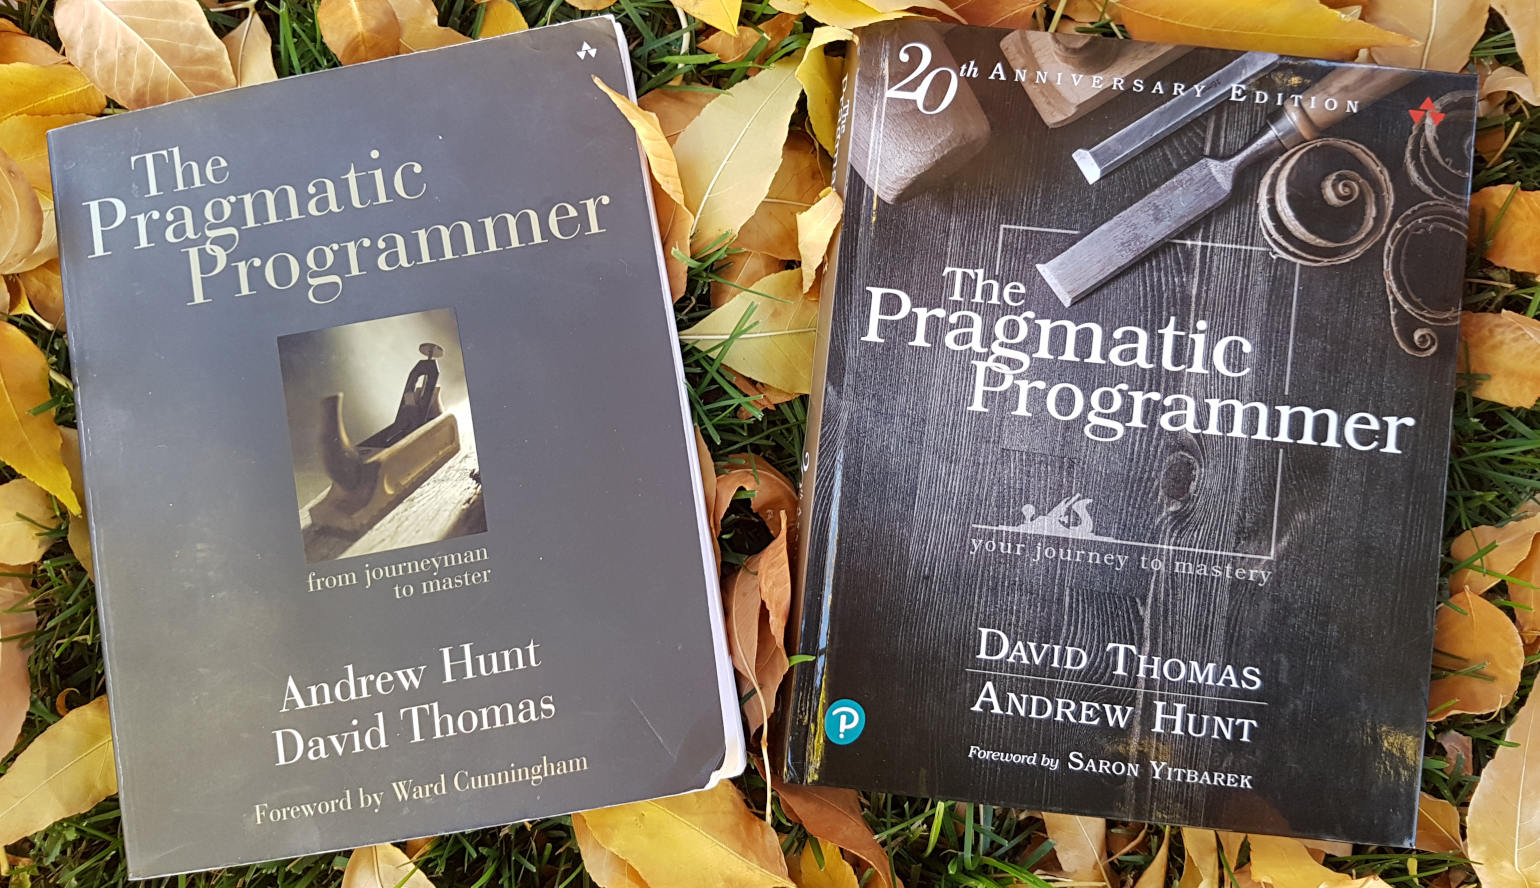 Photo of the original and 20th anniversary editions of The Pragmatic Programmer book, atop lawn and fall leaves